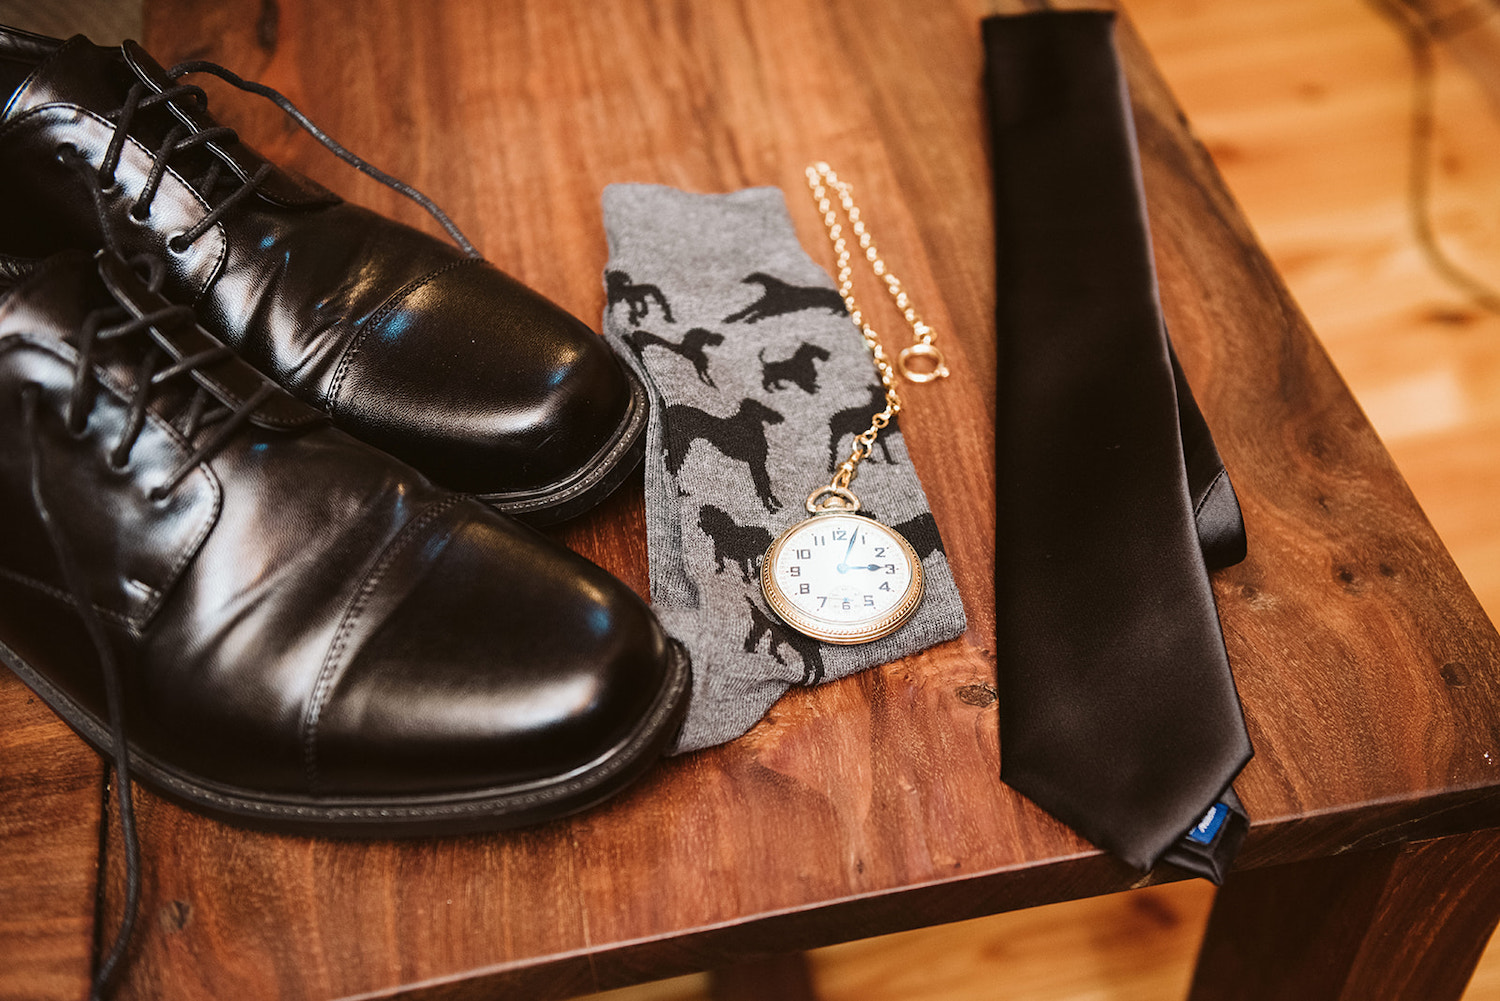 pocket watch sits on top of gray socks stitched with black dogs. Black mens shoes and black tie nearby.